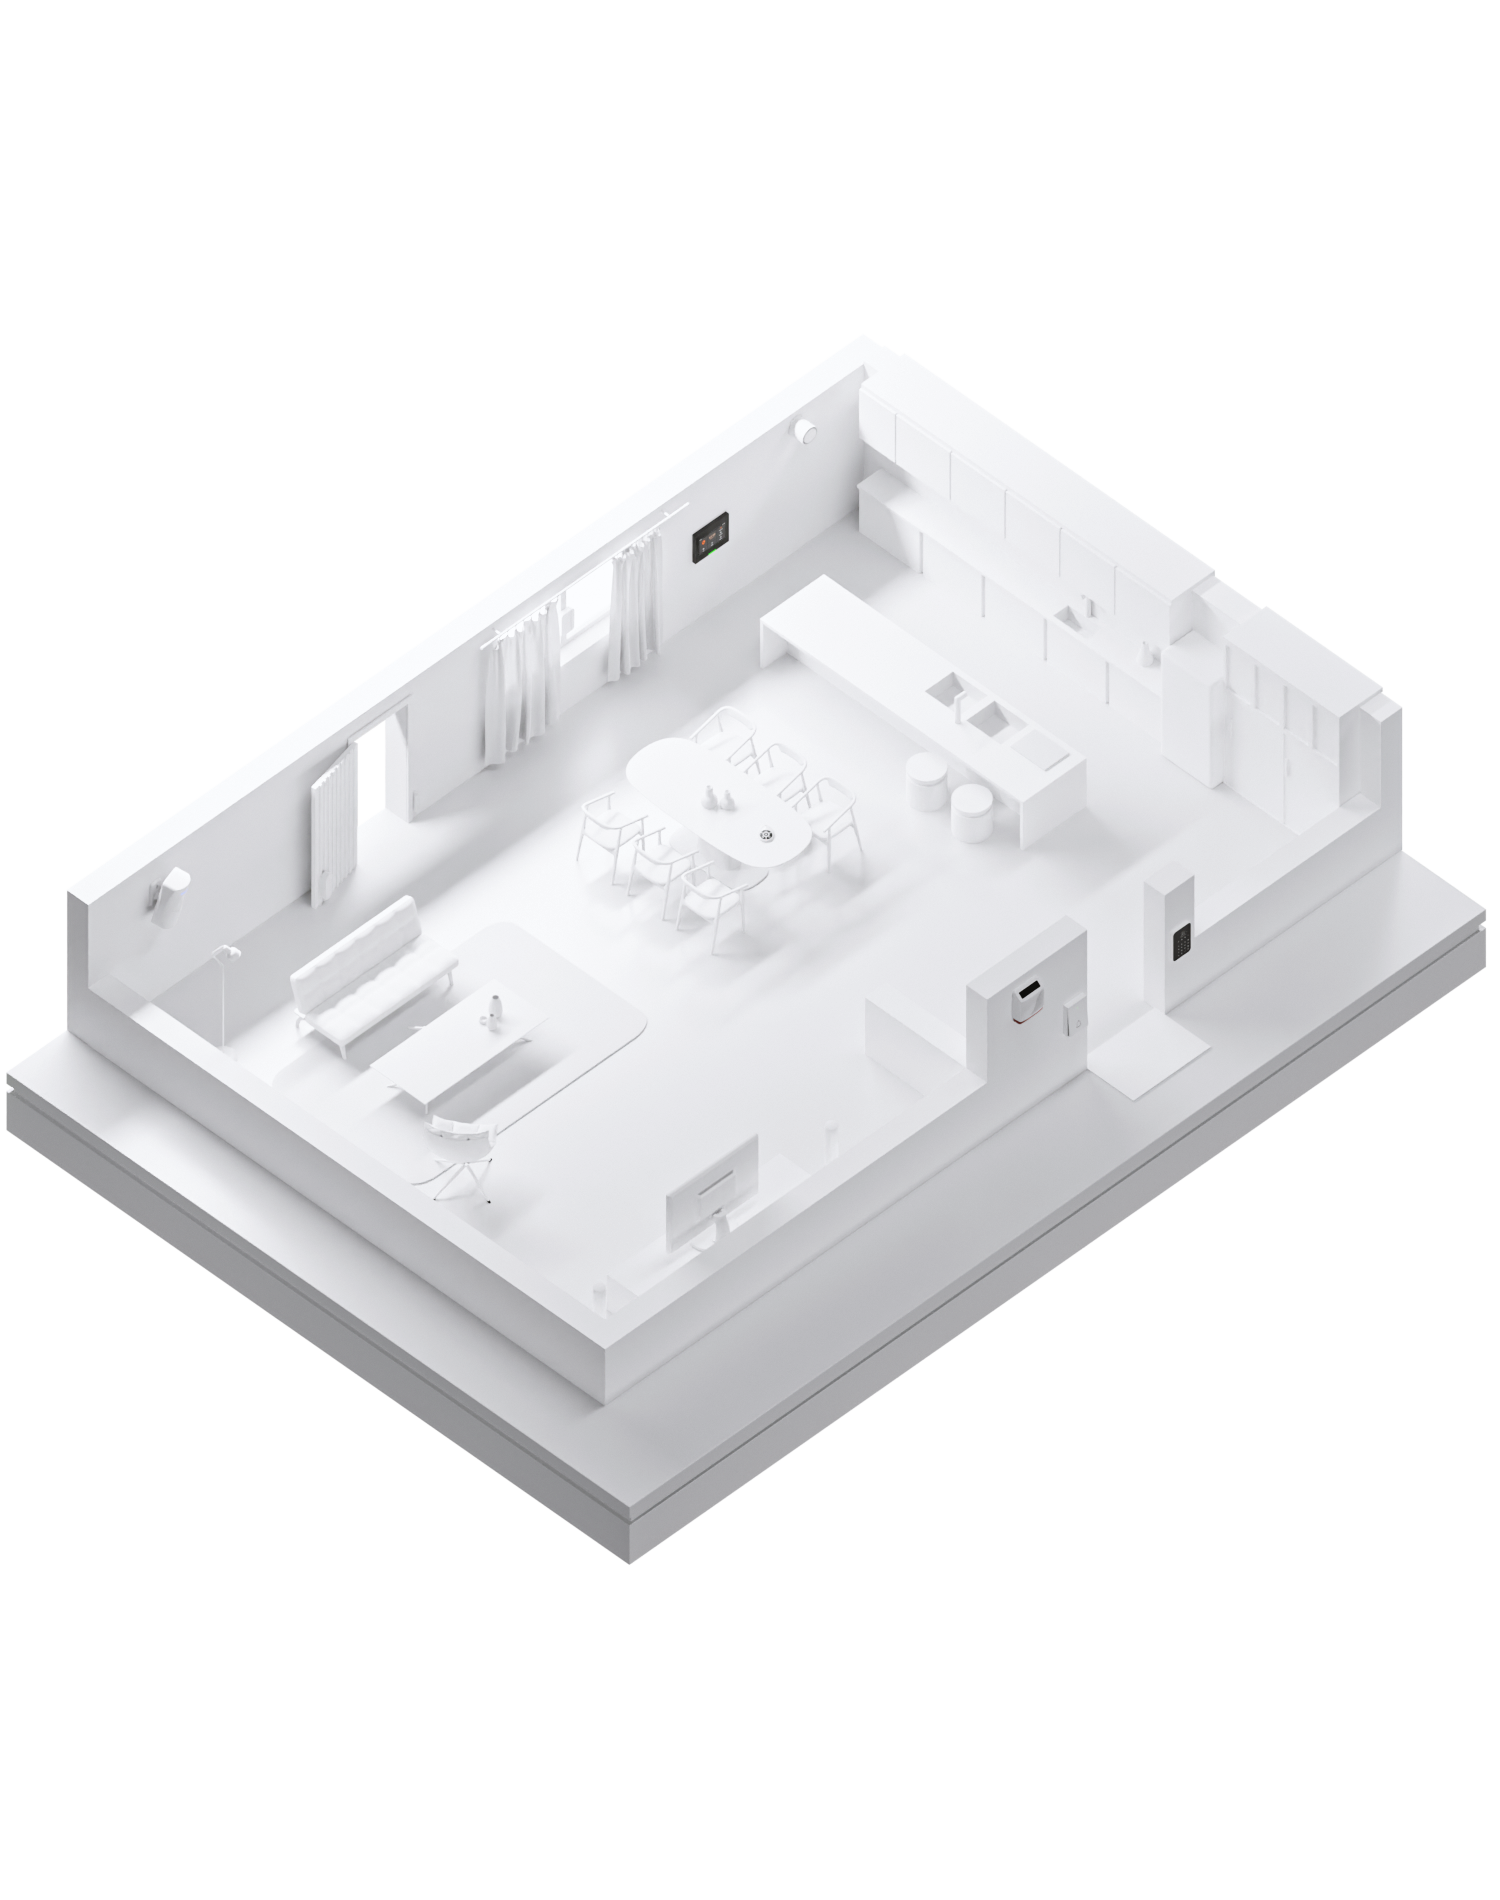 Staniot smart security system & accessories axonometric diagram view inside home floor plan